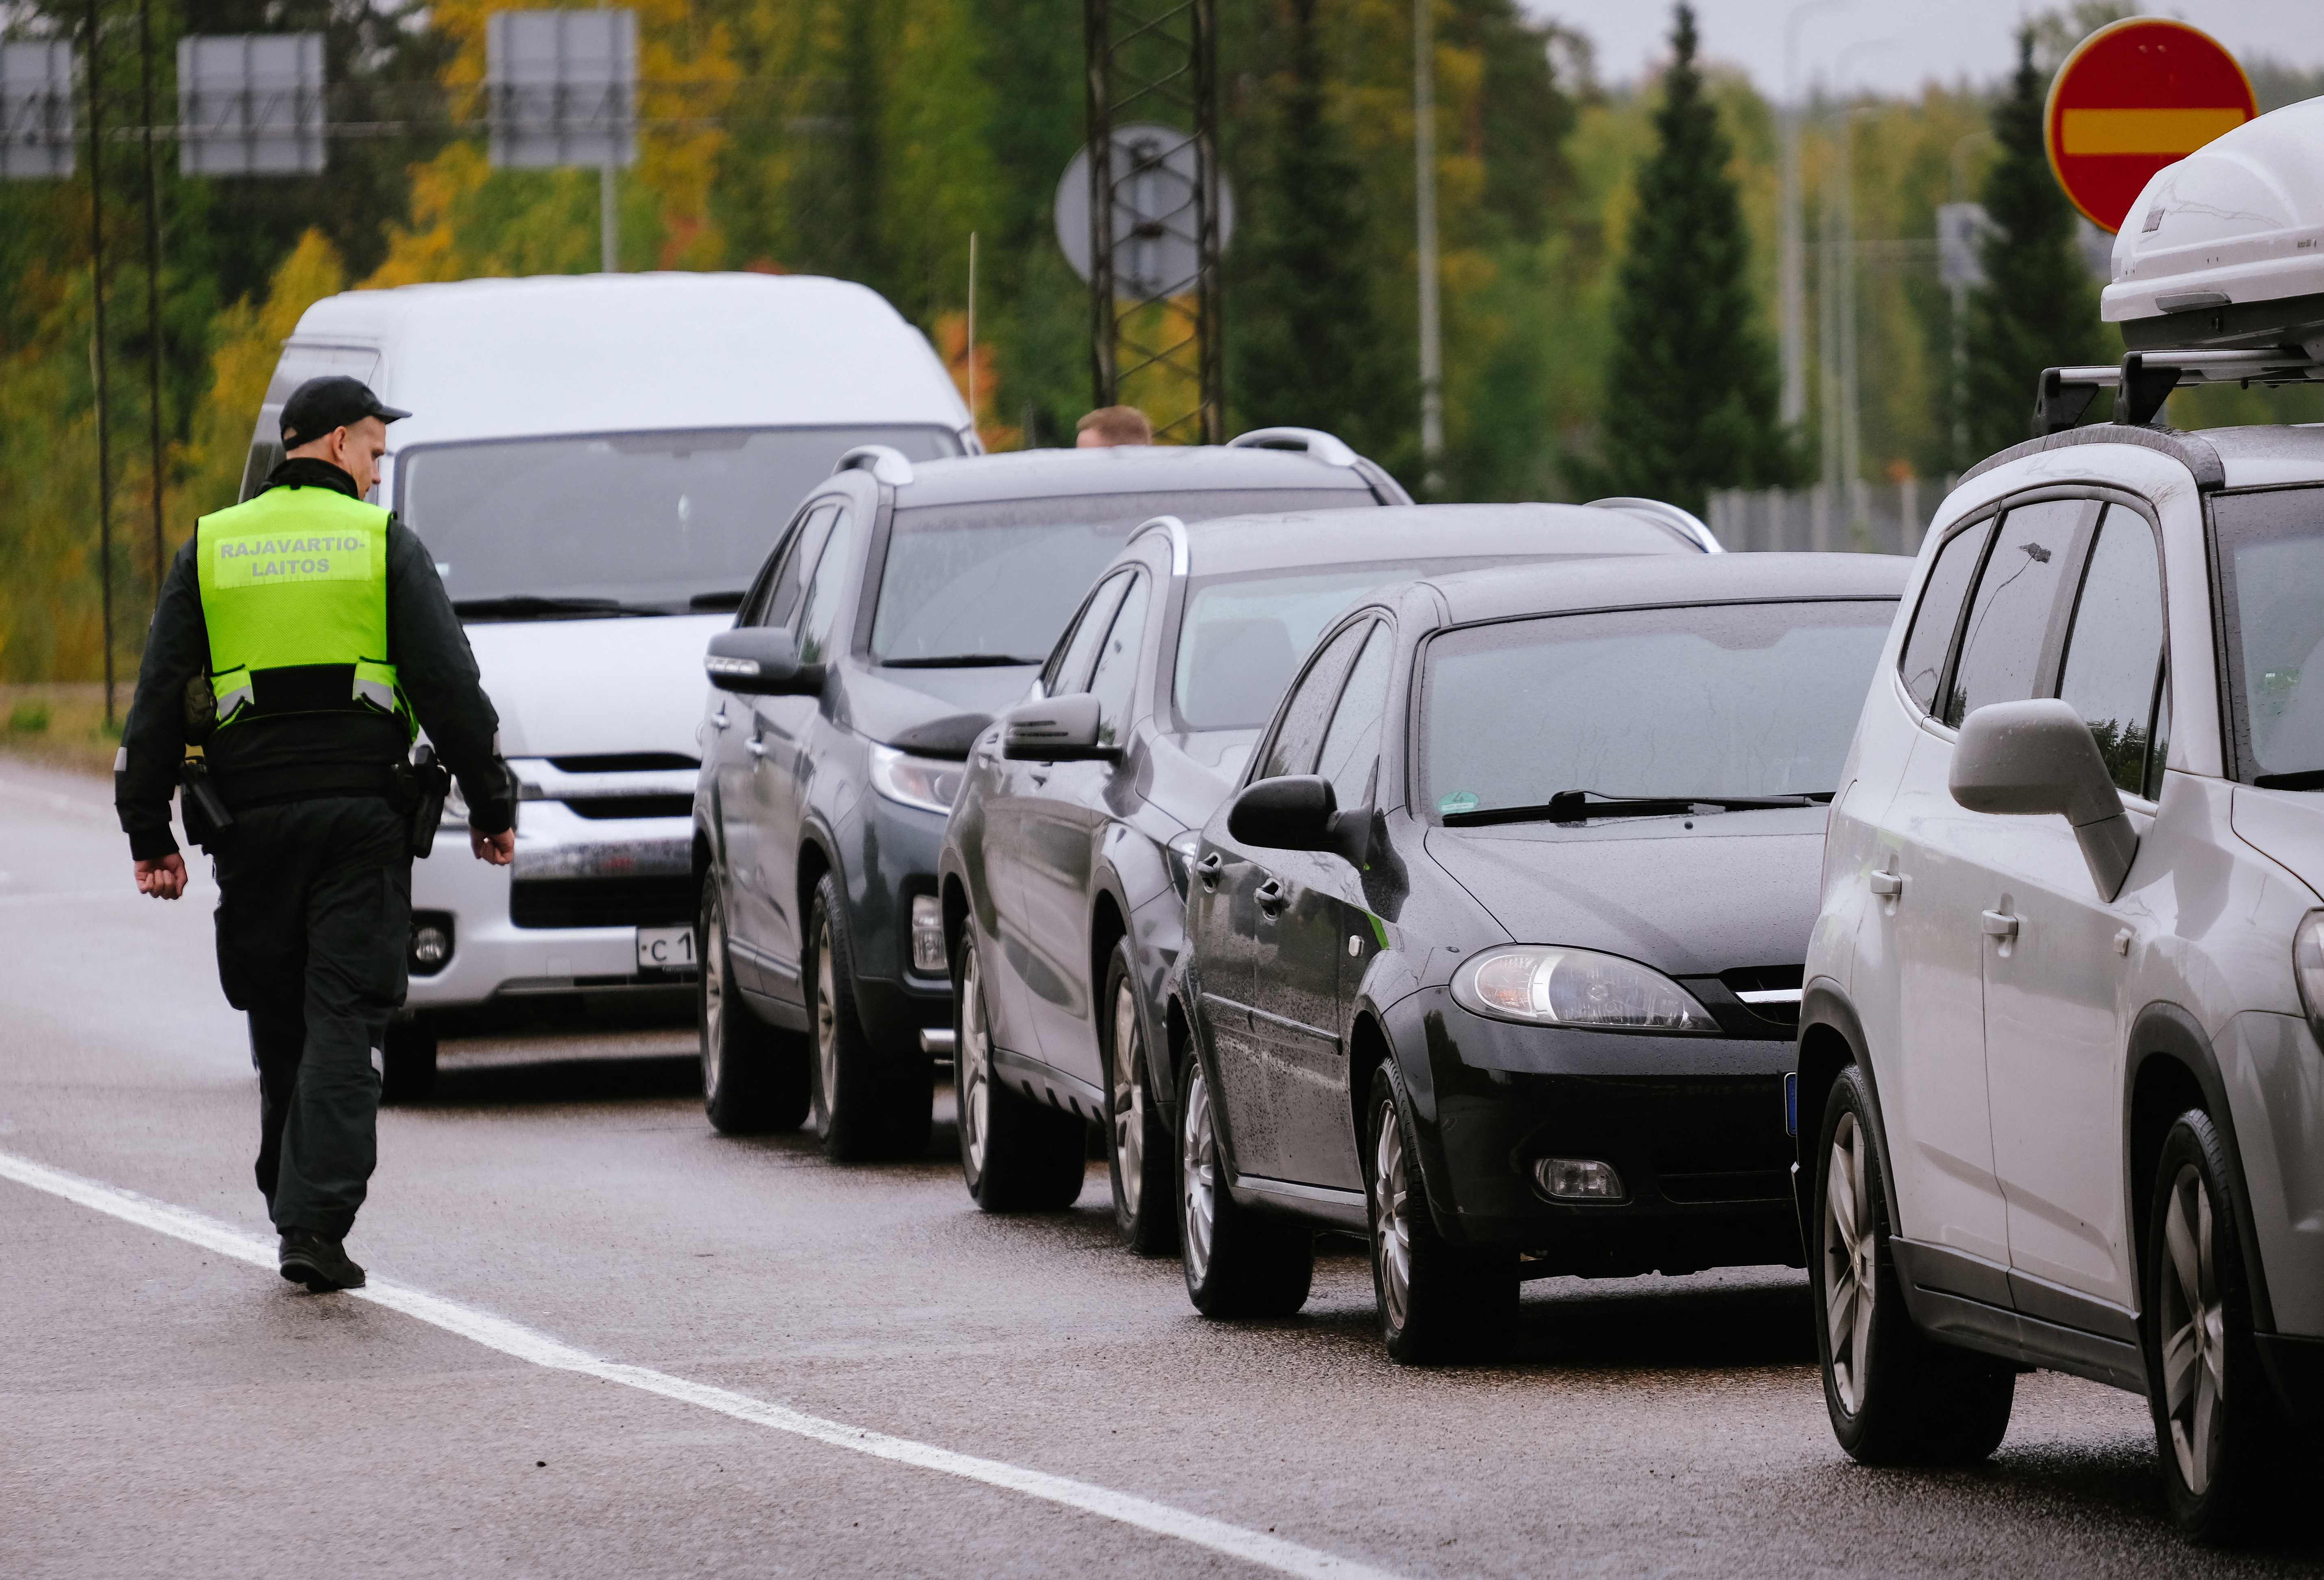 A border guard officer controls the vehicles entering Finland at the border checkpoint crossing in Vaalimaa, Finland, on the border with the Russian Federation